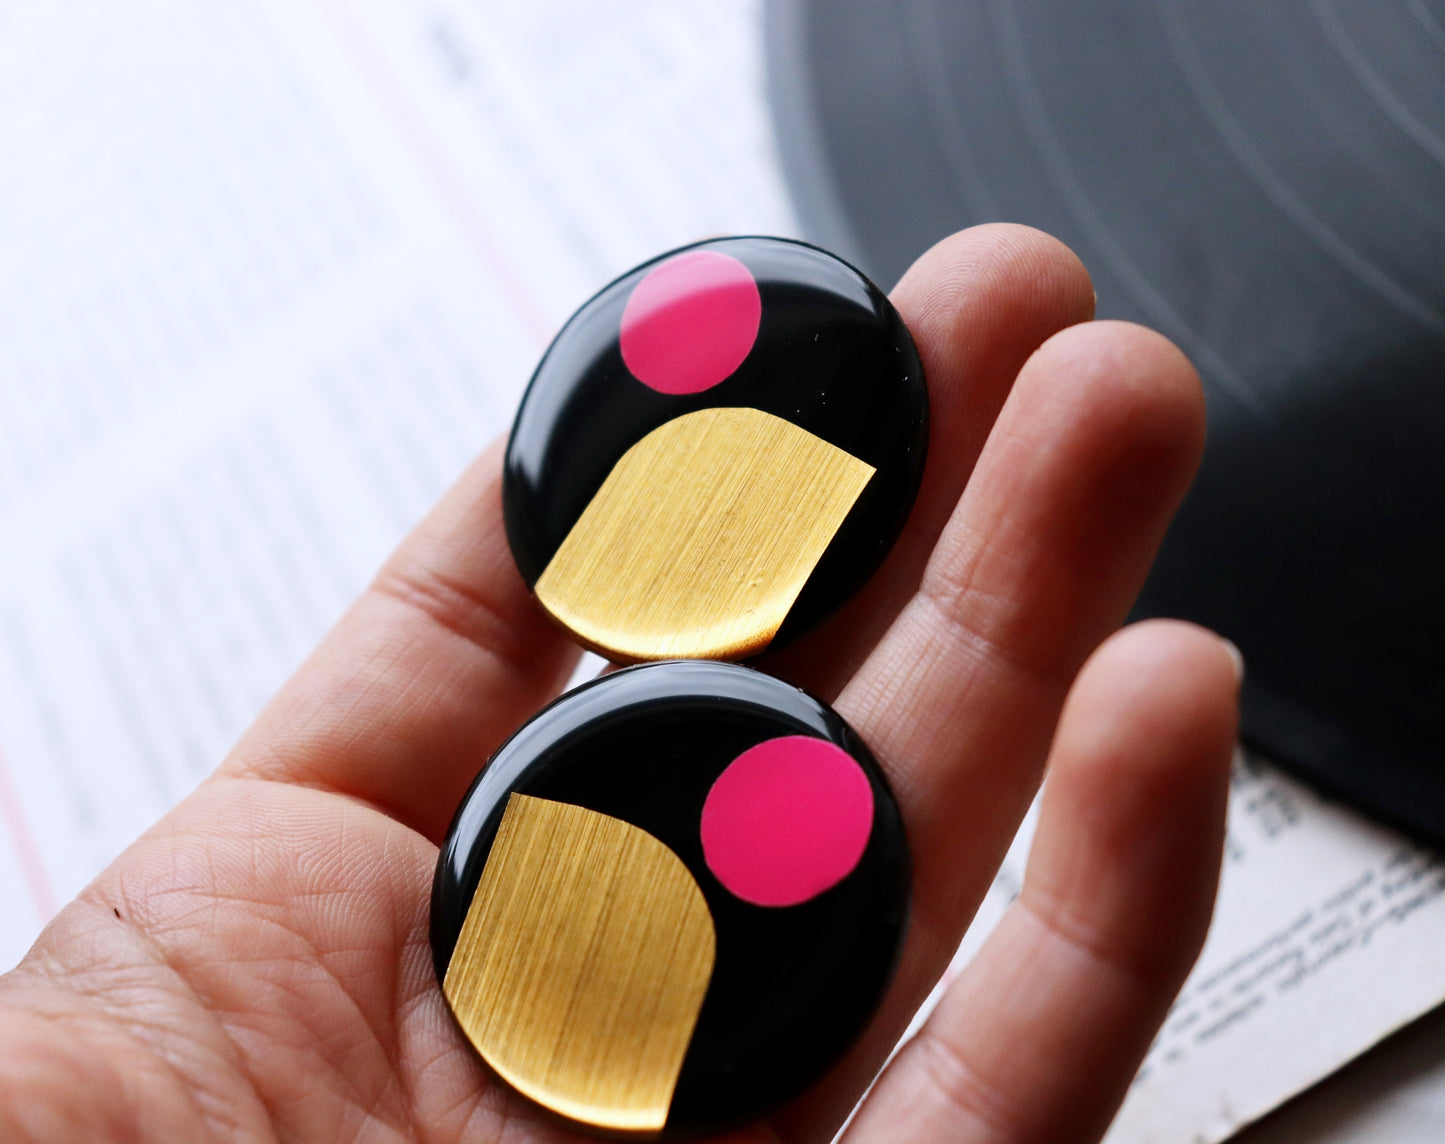 Large statement stud earrings in gold & fuchsia / upcycled vinyl record jewellery